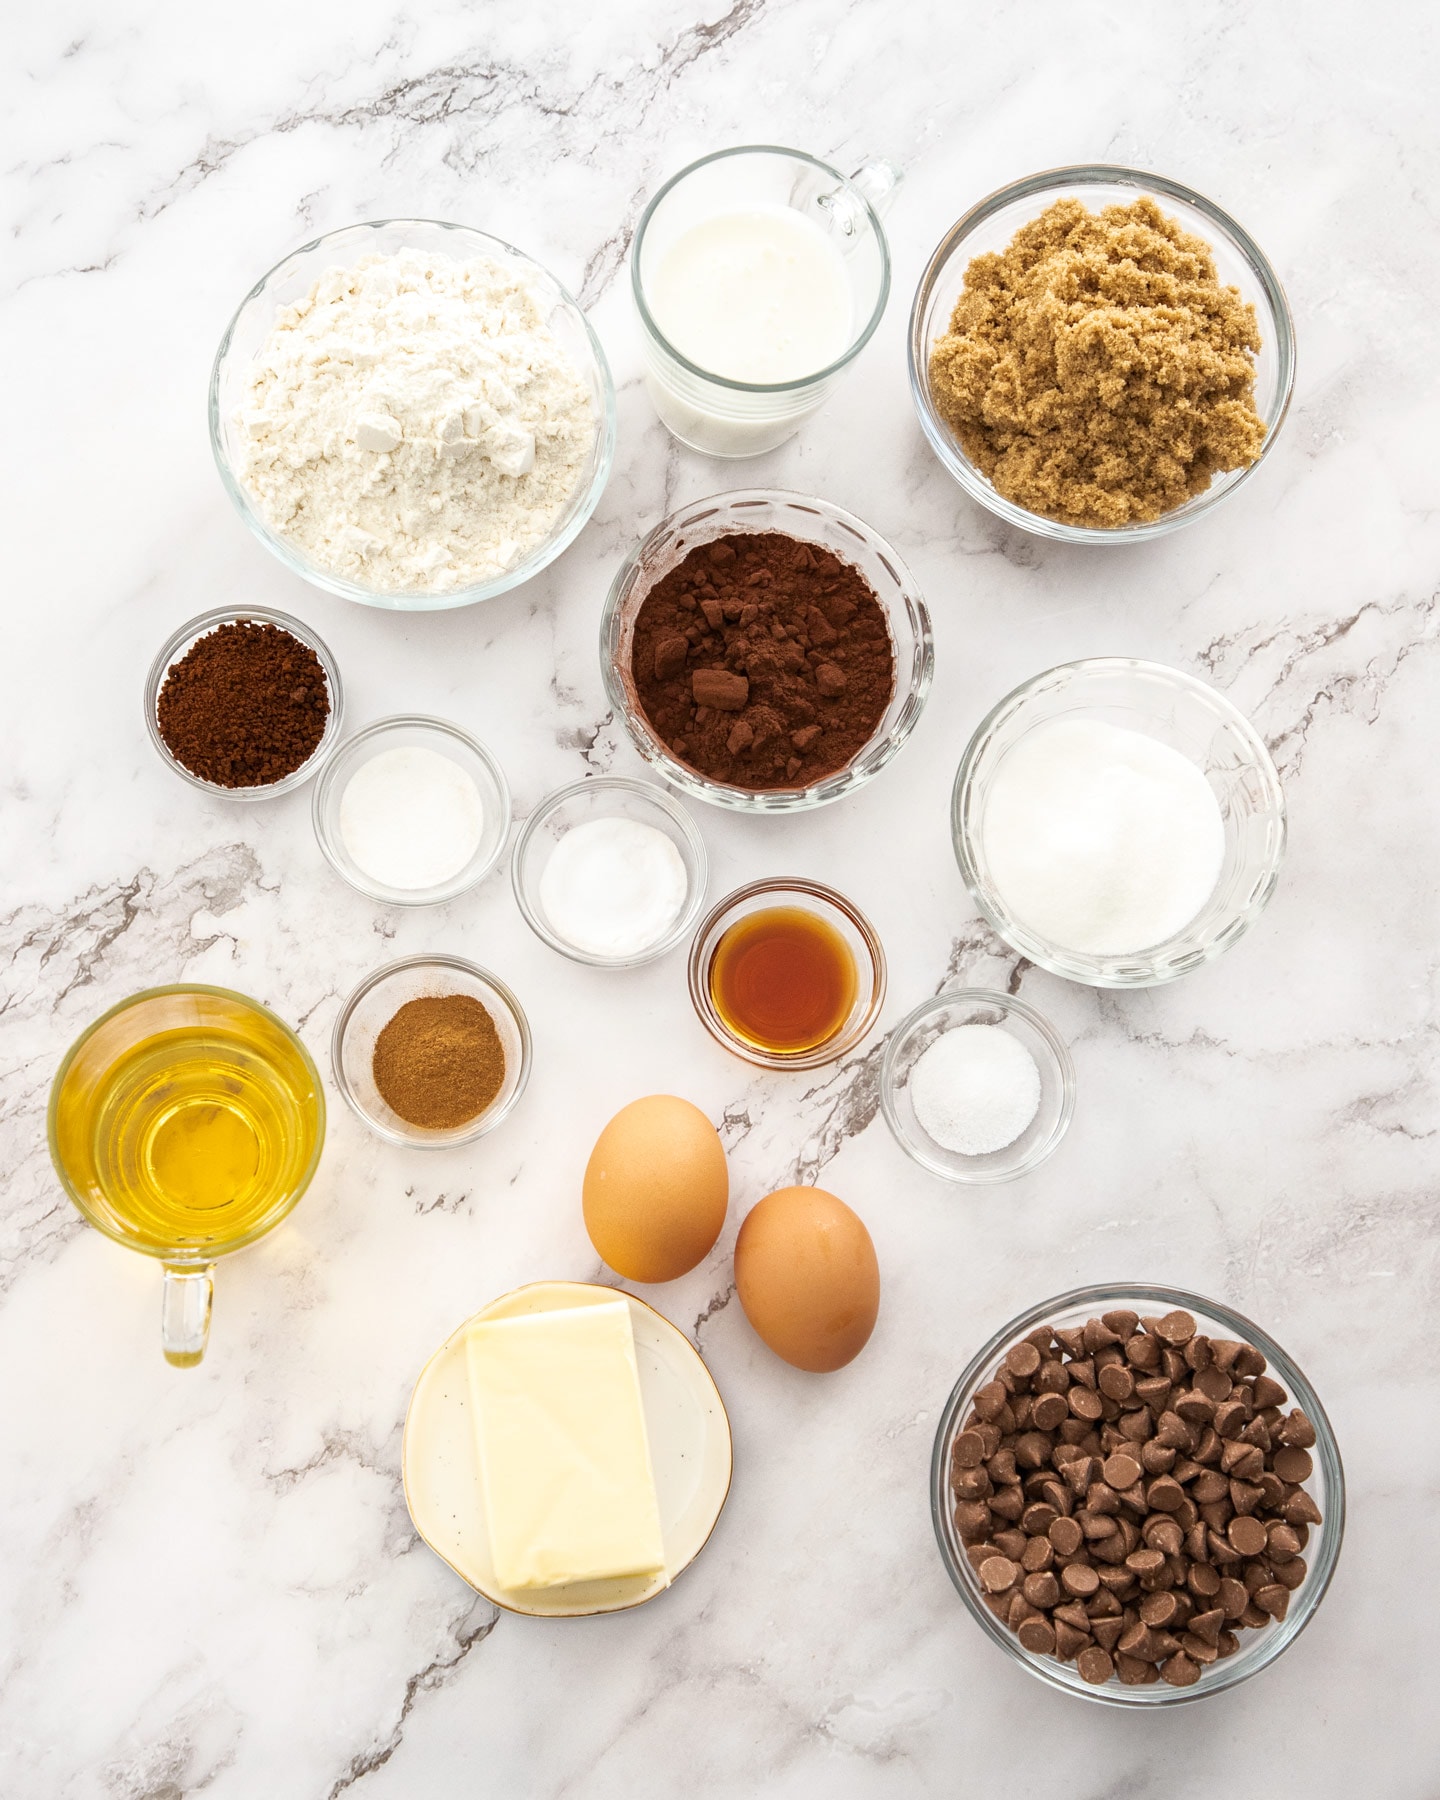 Ingredients for chocolate crumb cake on a marble bench top.